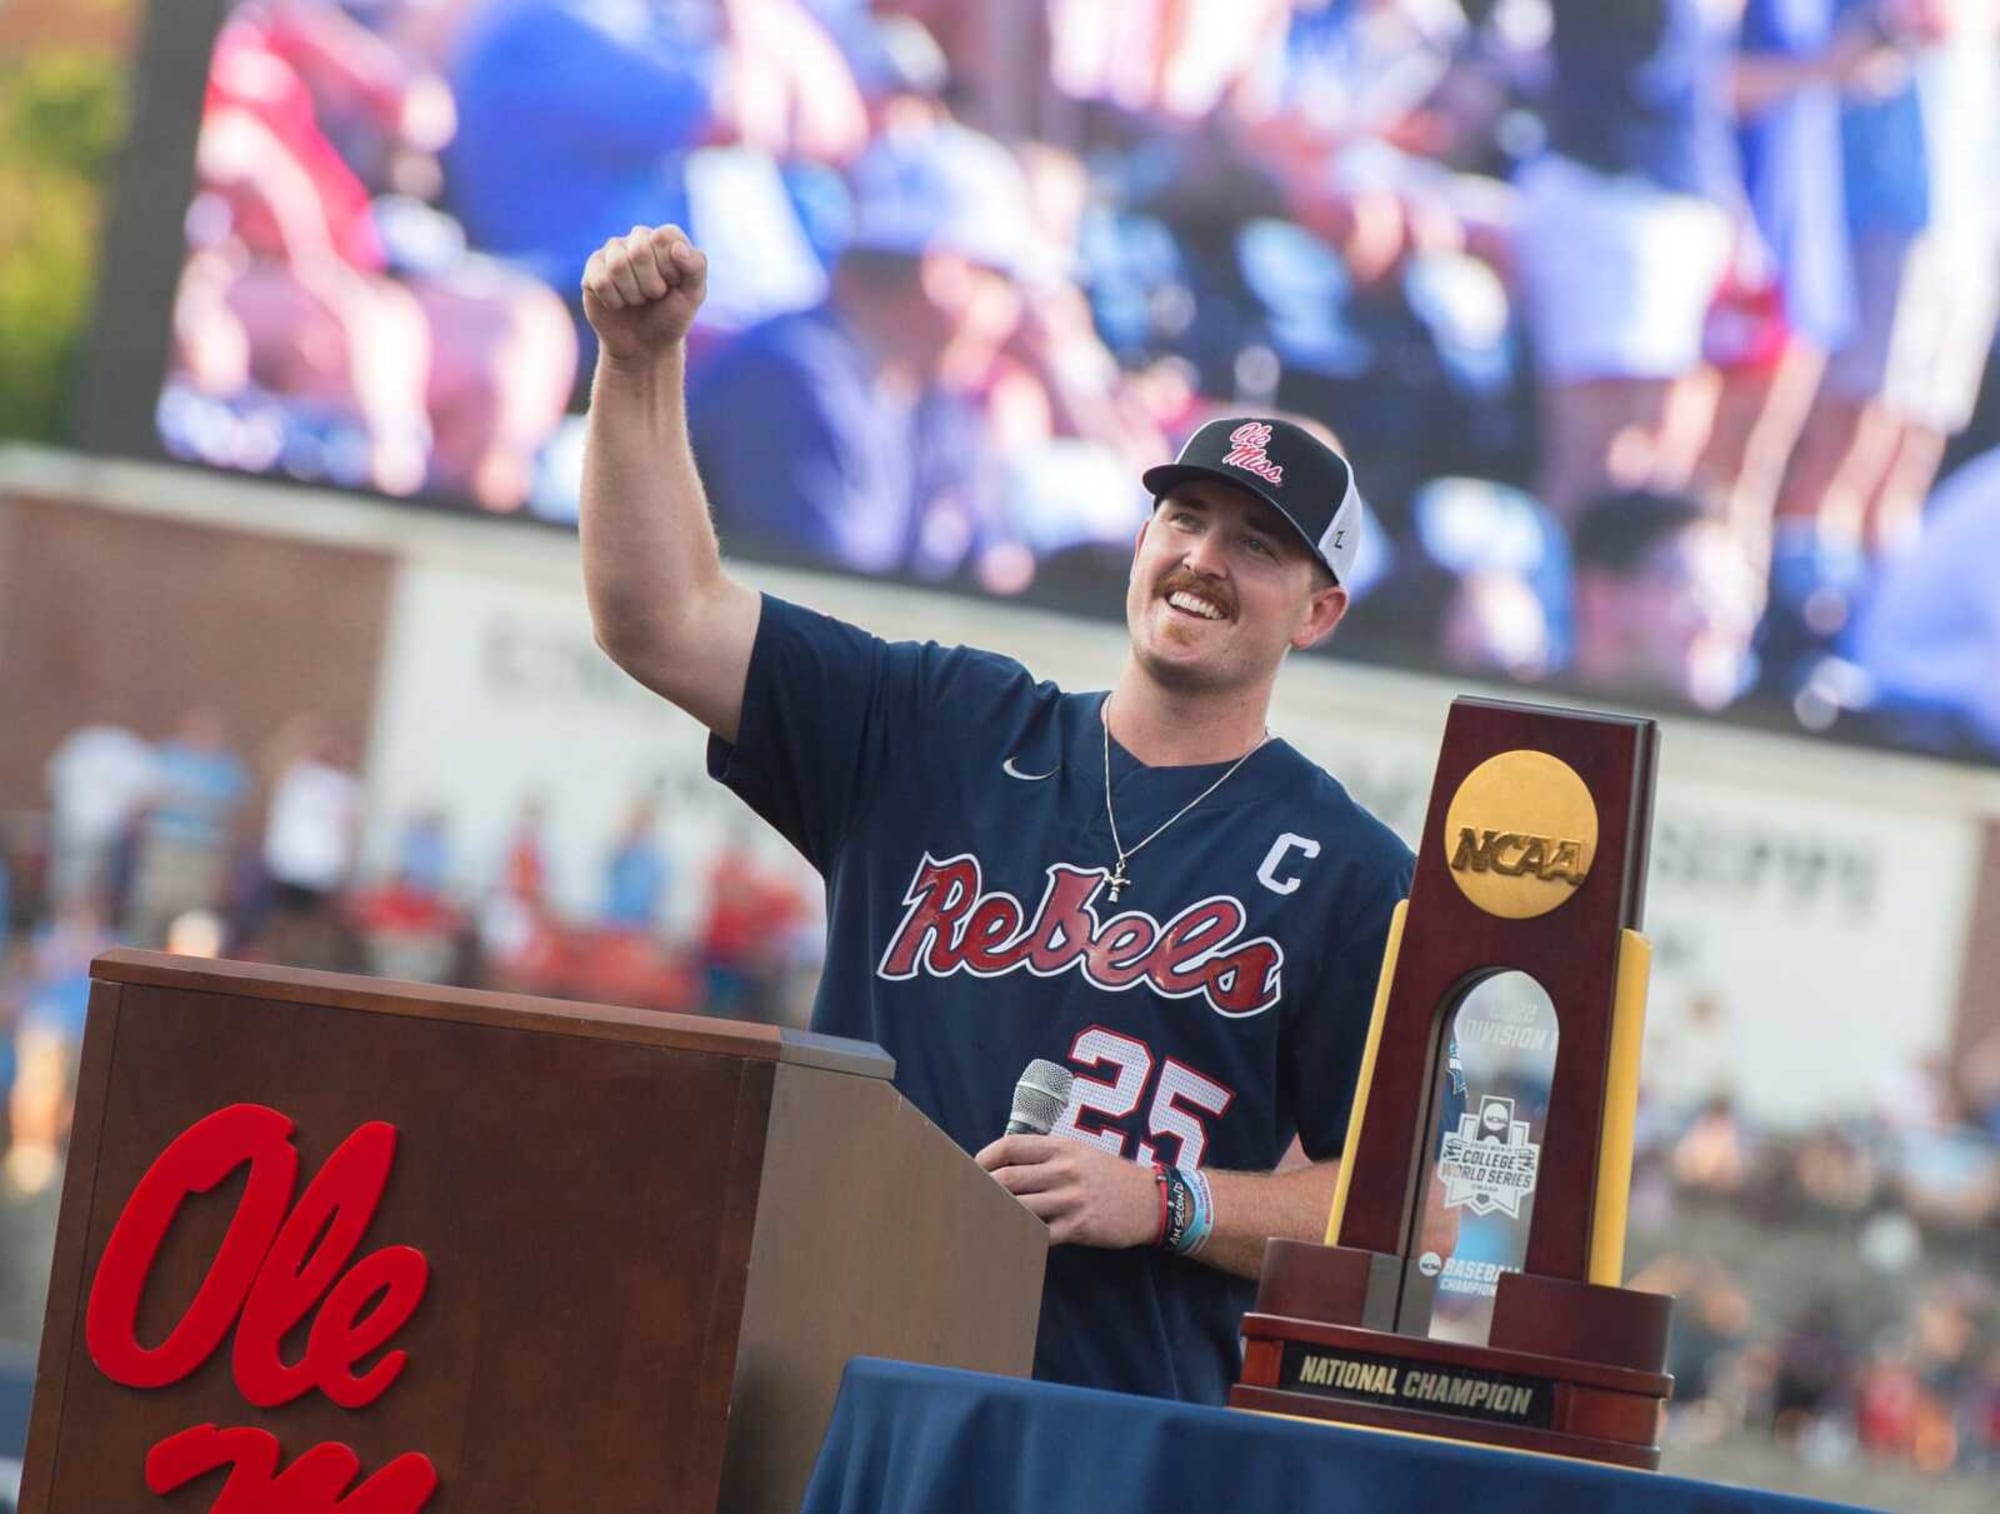 Ole Miss Baseball kicks off tonight, heres the start time and how to watch